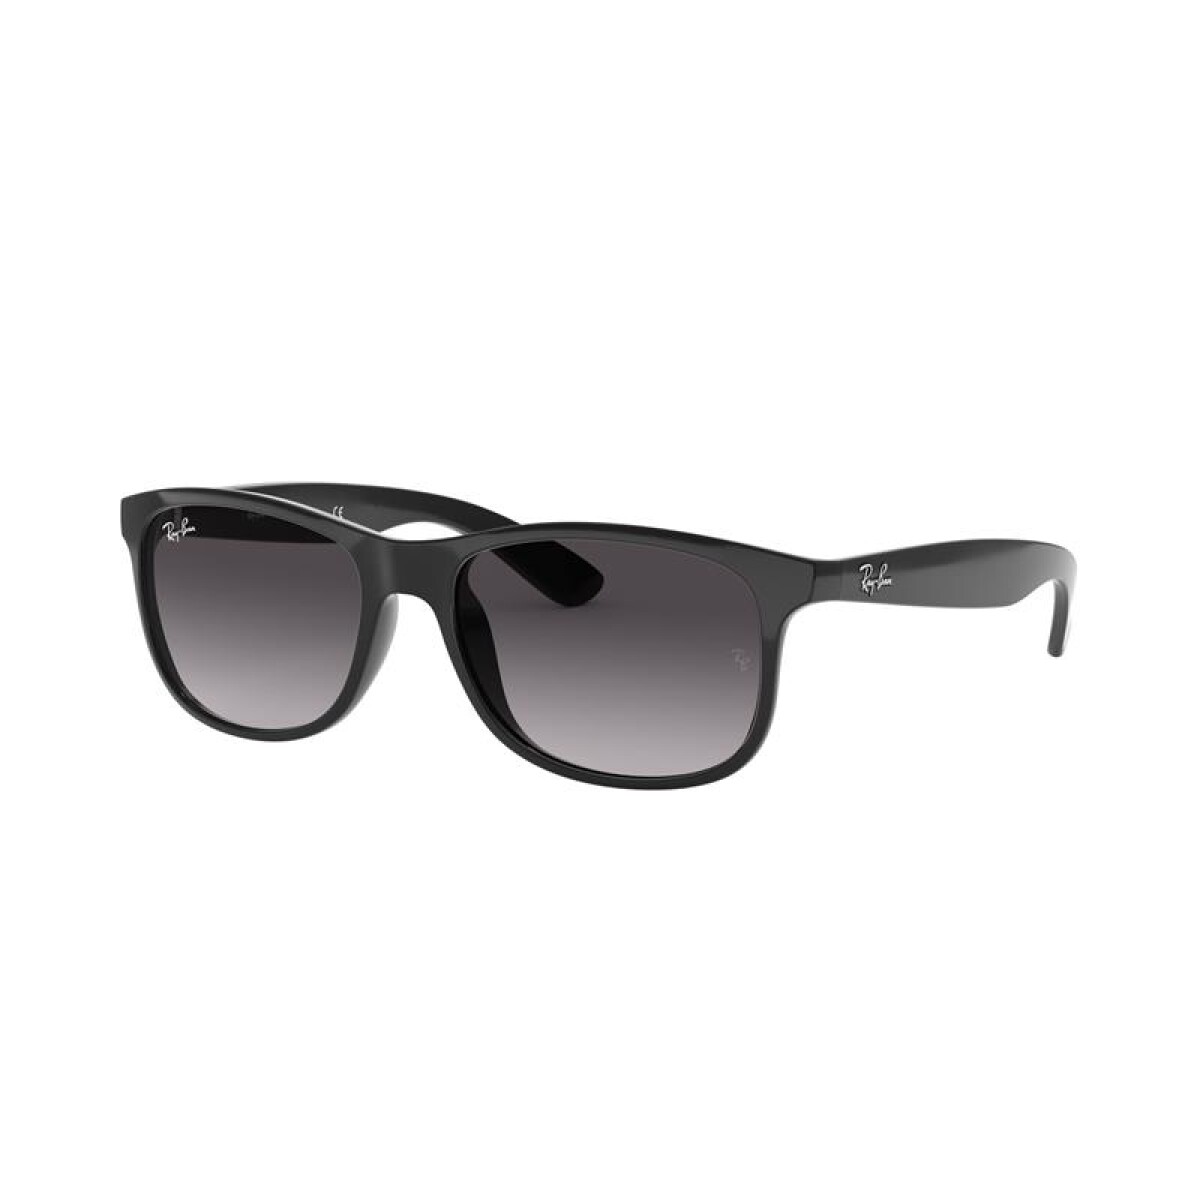 Ray Ban Rb4202 Andy - 601/8g 